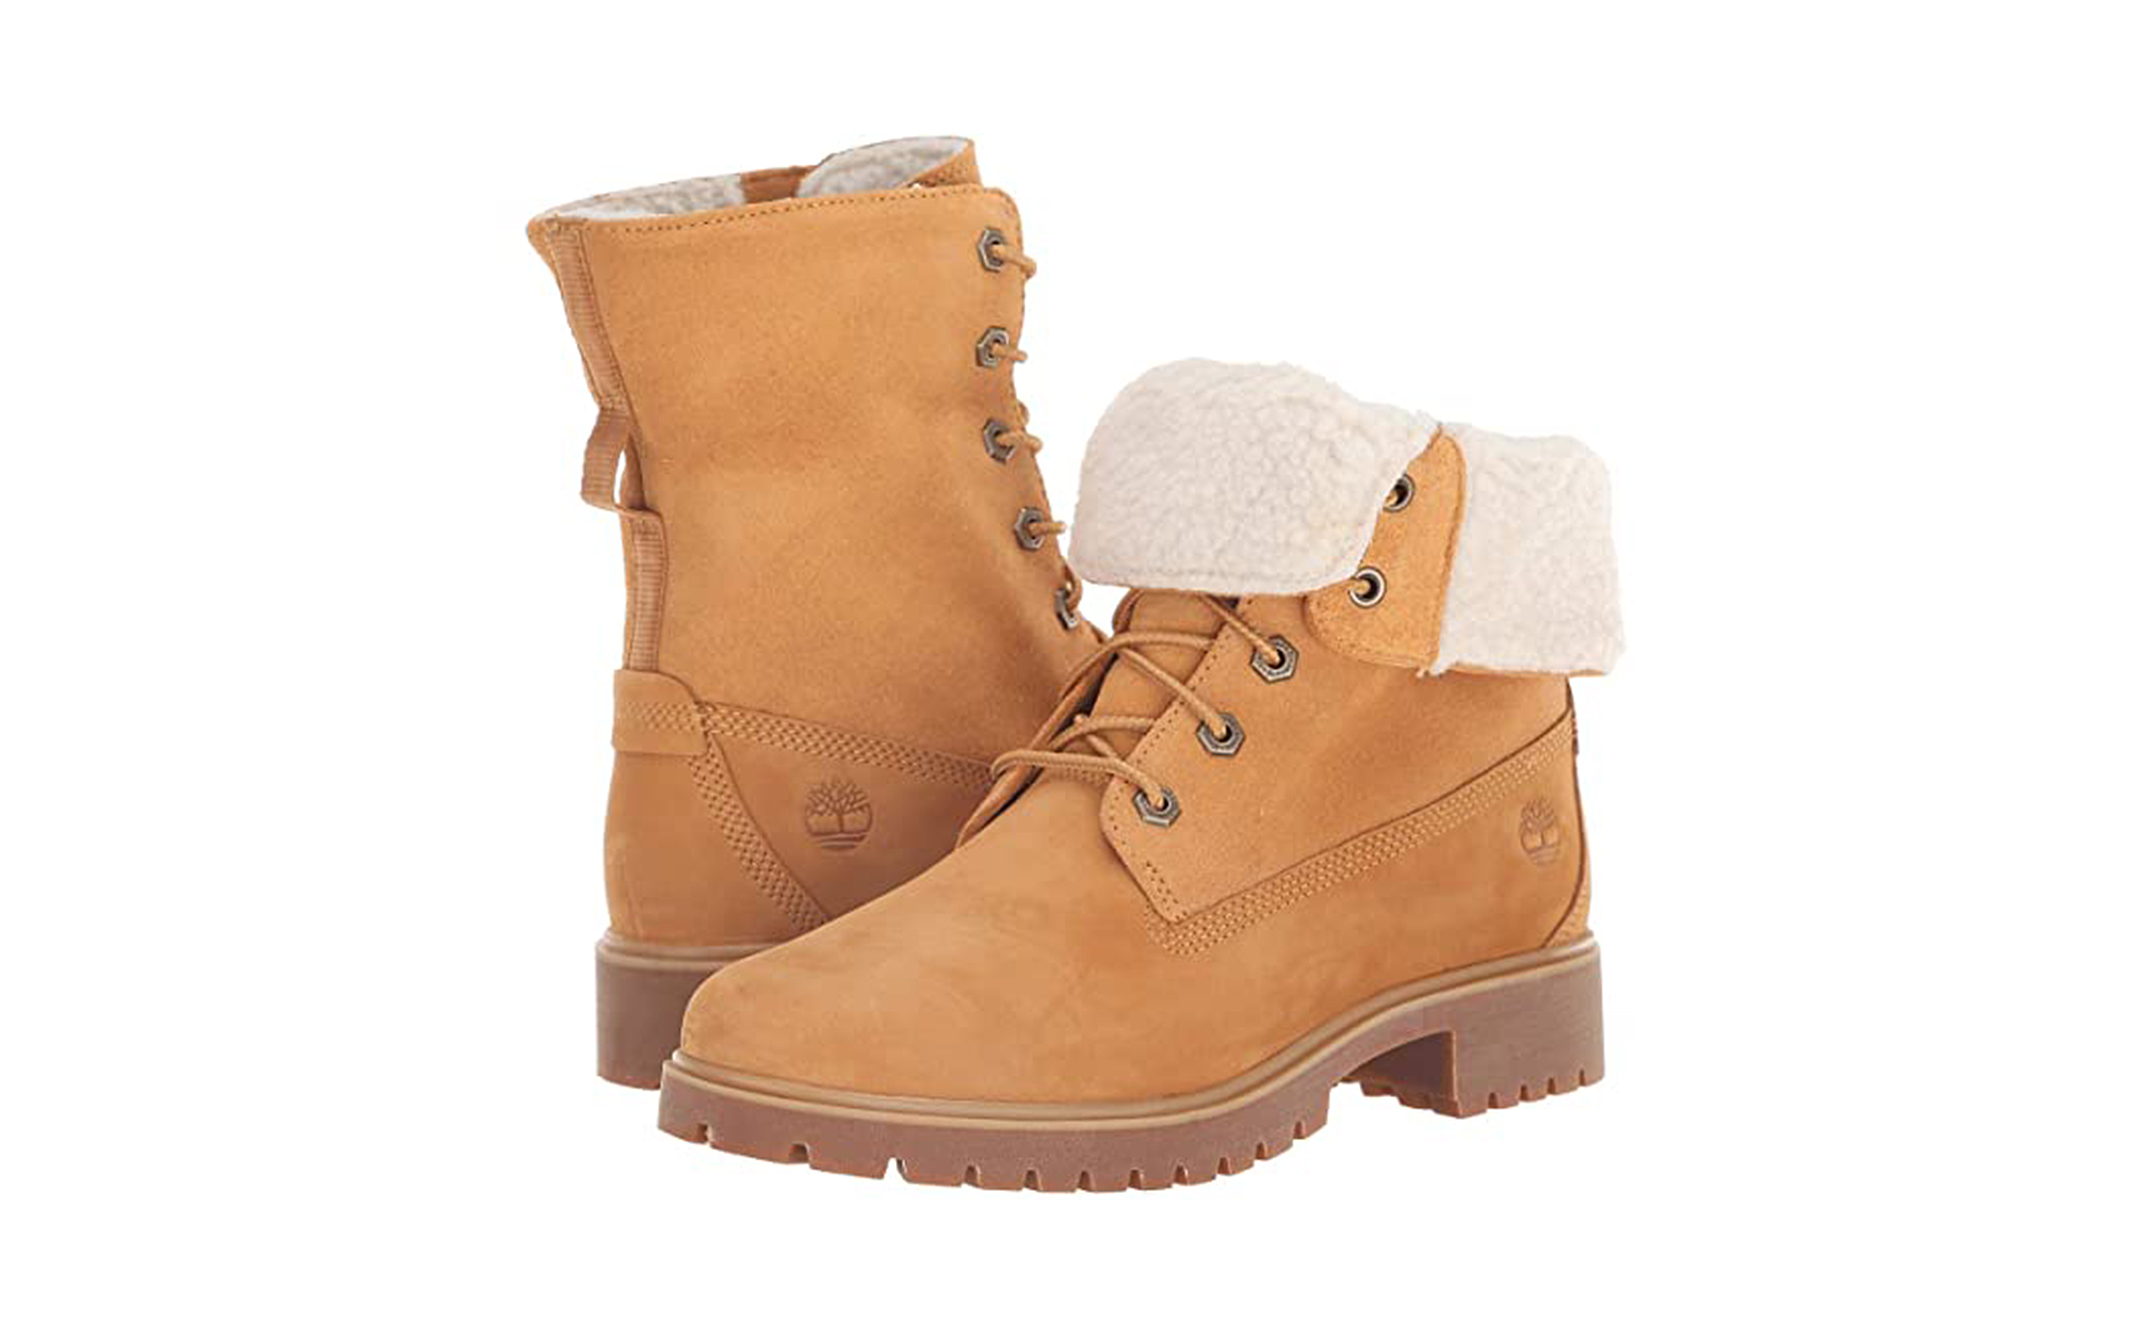 hop slinger verfrommeld Timberland Waterproof Boots Are Perfectly Feminine and on Sale